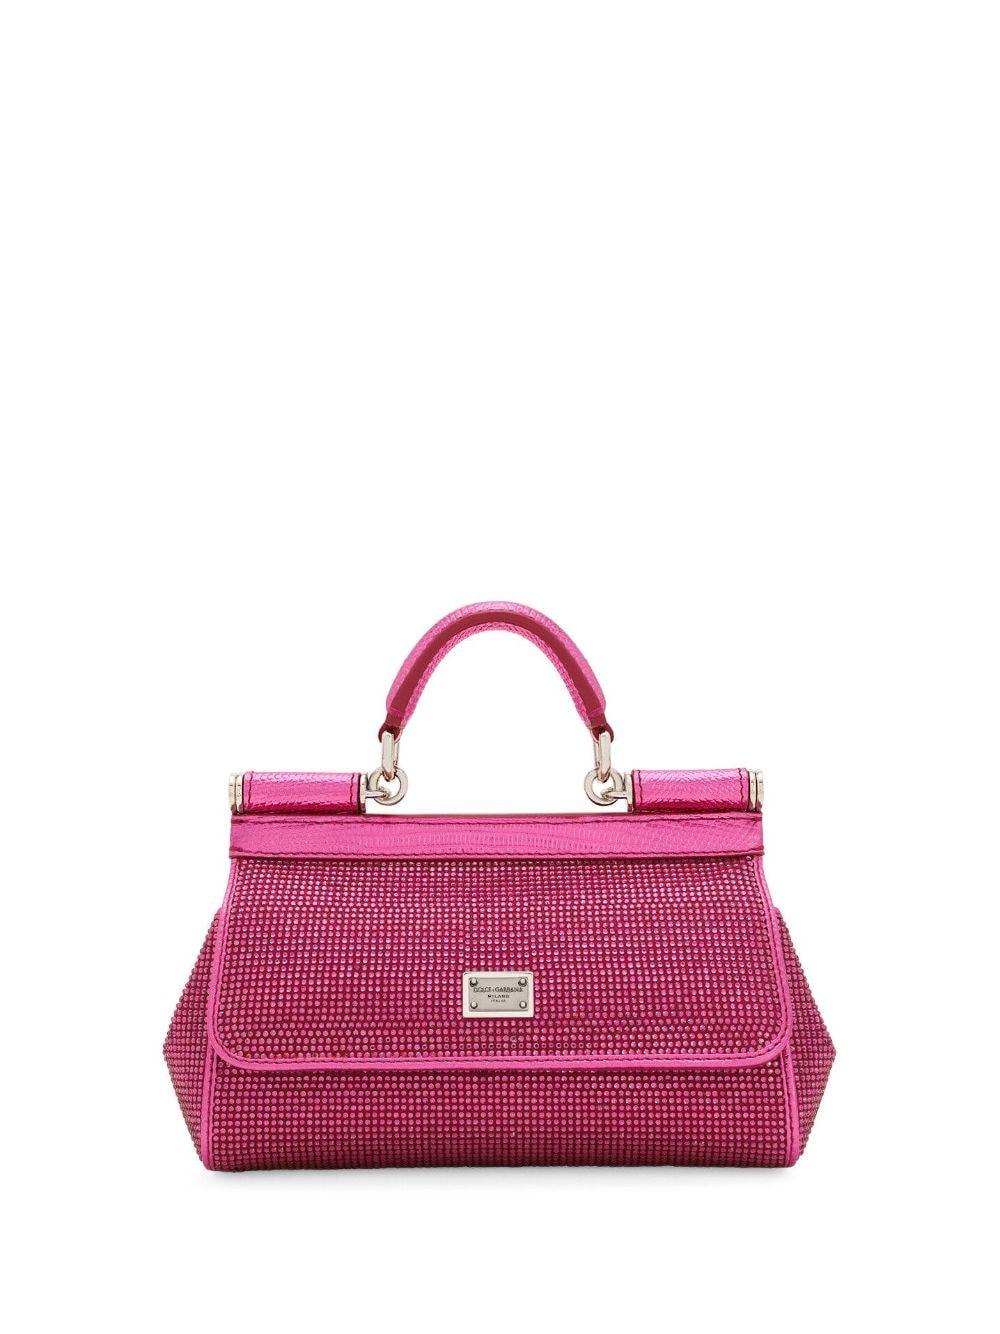 X Kim Sicily Small Leather Shoulder Bag in Pink - Dolce Gabbana